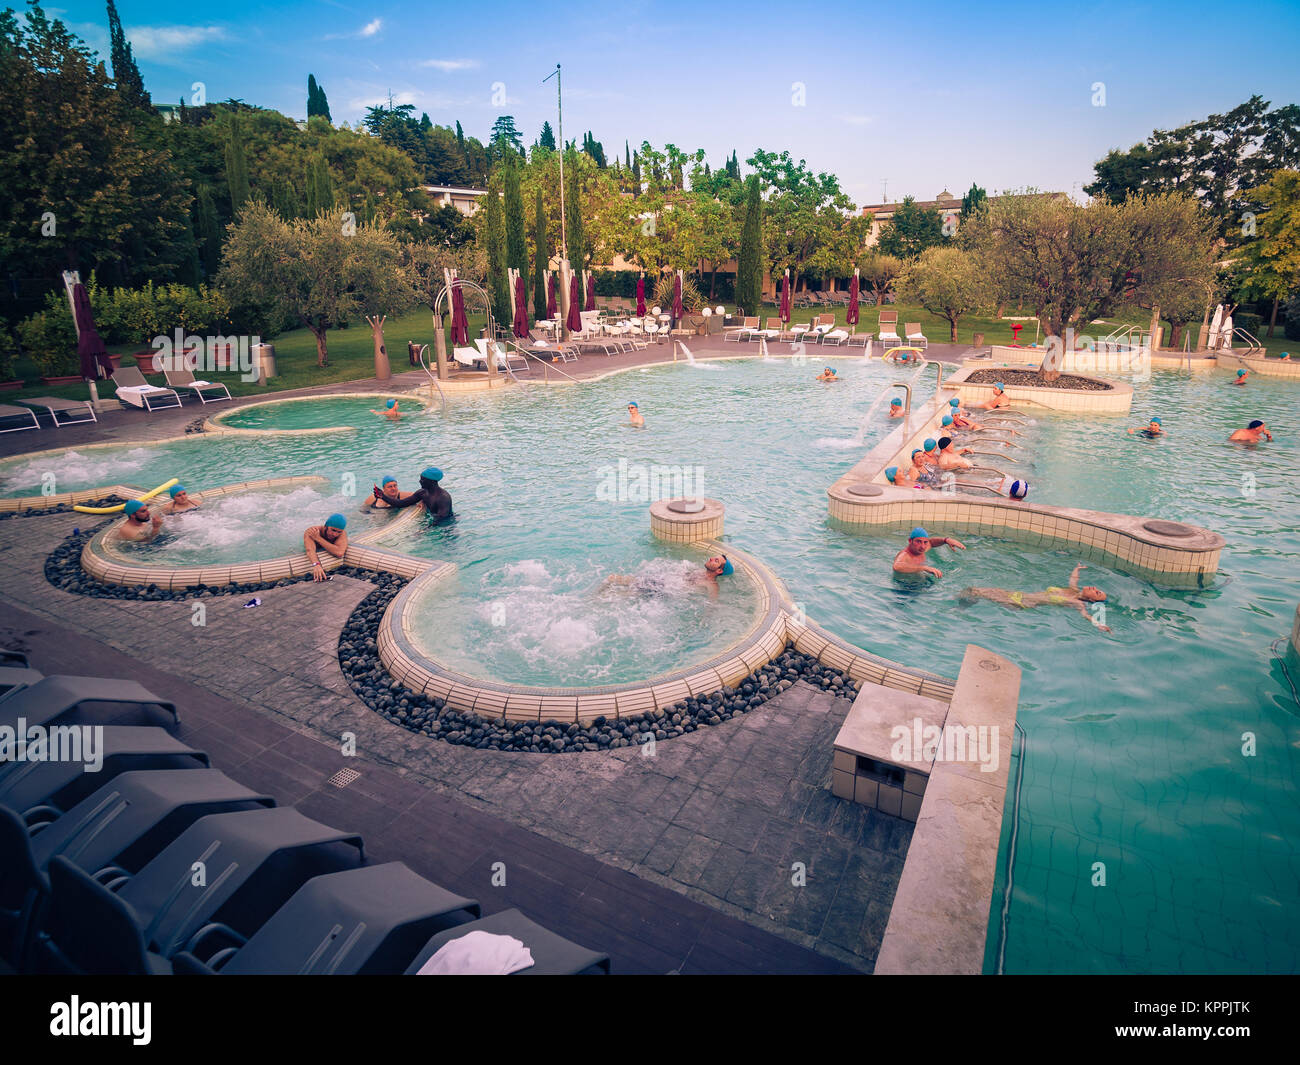 Sirmione Italy August 3 16 Aquaria Is The Thermal Spa Center Stock Photo Alamy